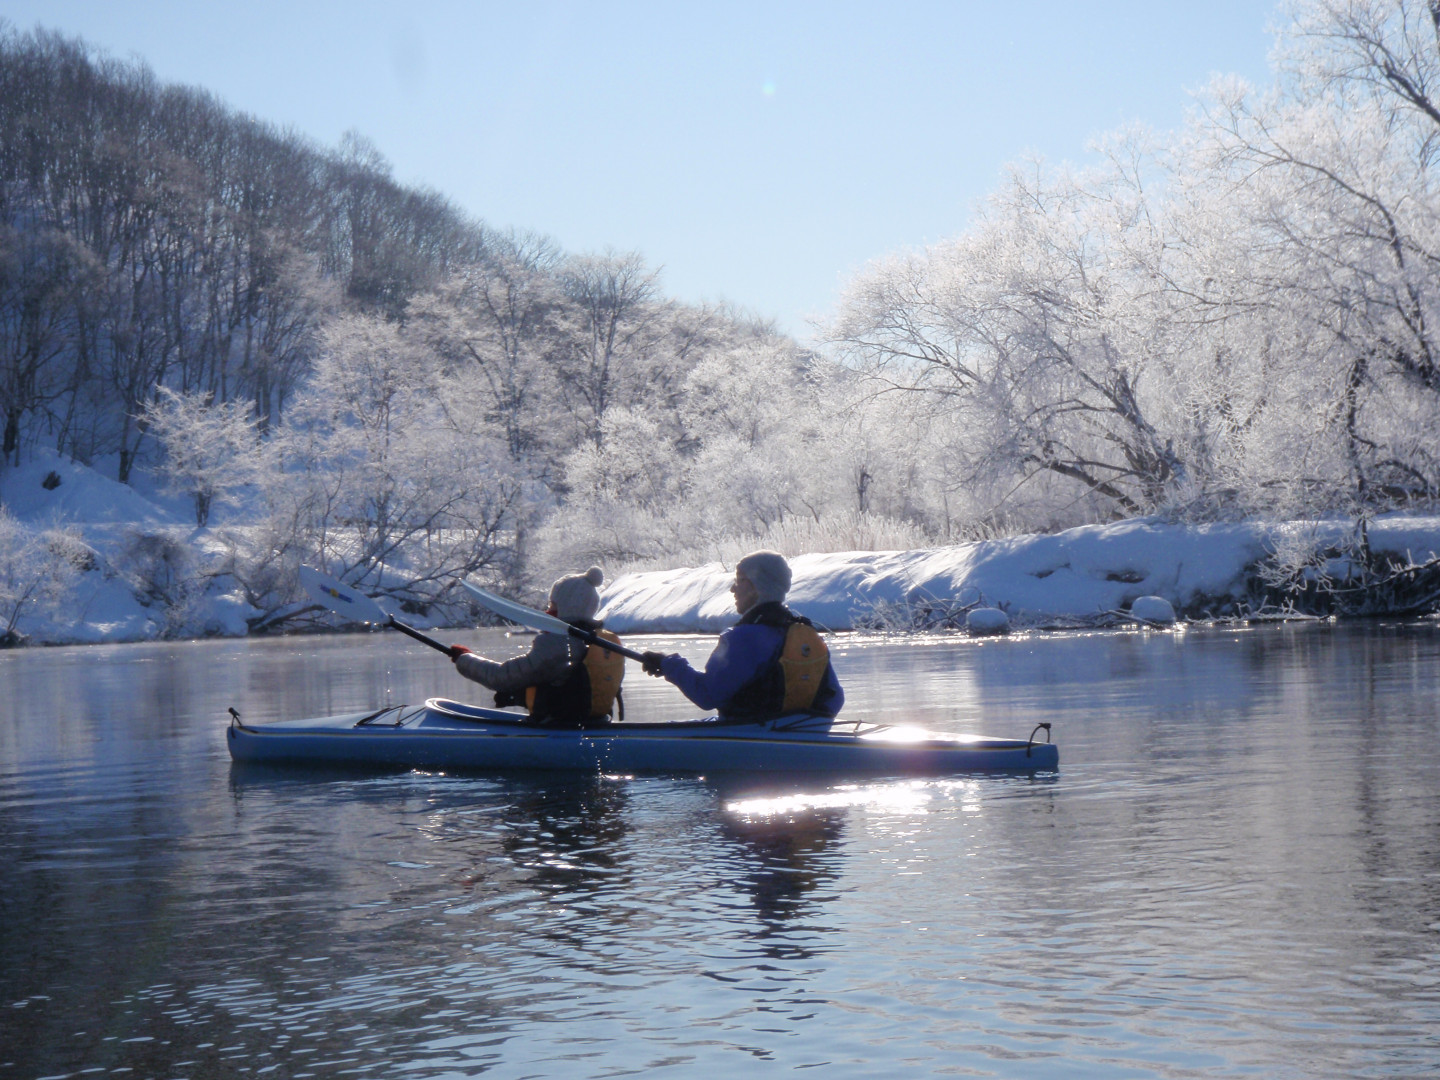 Winter nature experiences include winter canoeing on Kushiro River, and snowshoeing on the frozen Kushiro Wetlands.<br>A quintessential way to enjoy the great northern lands!